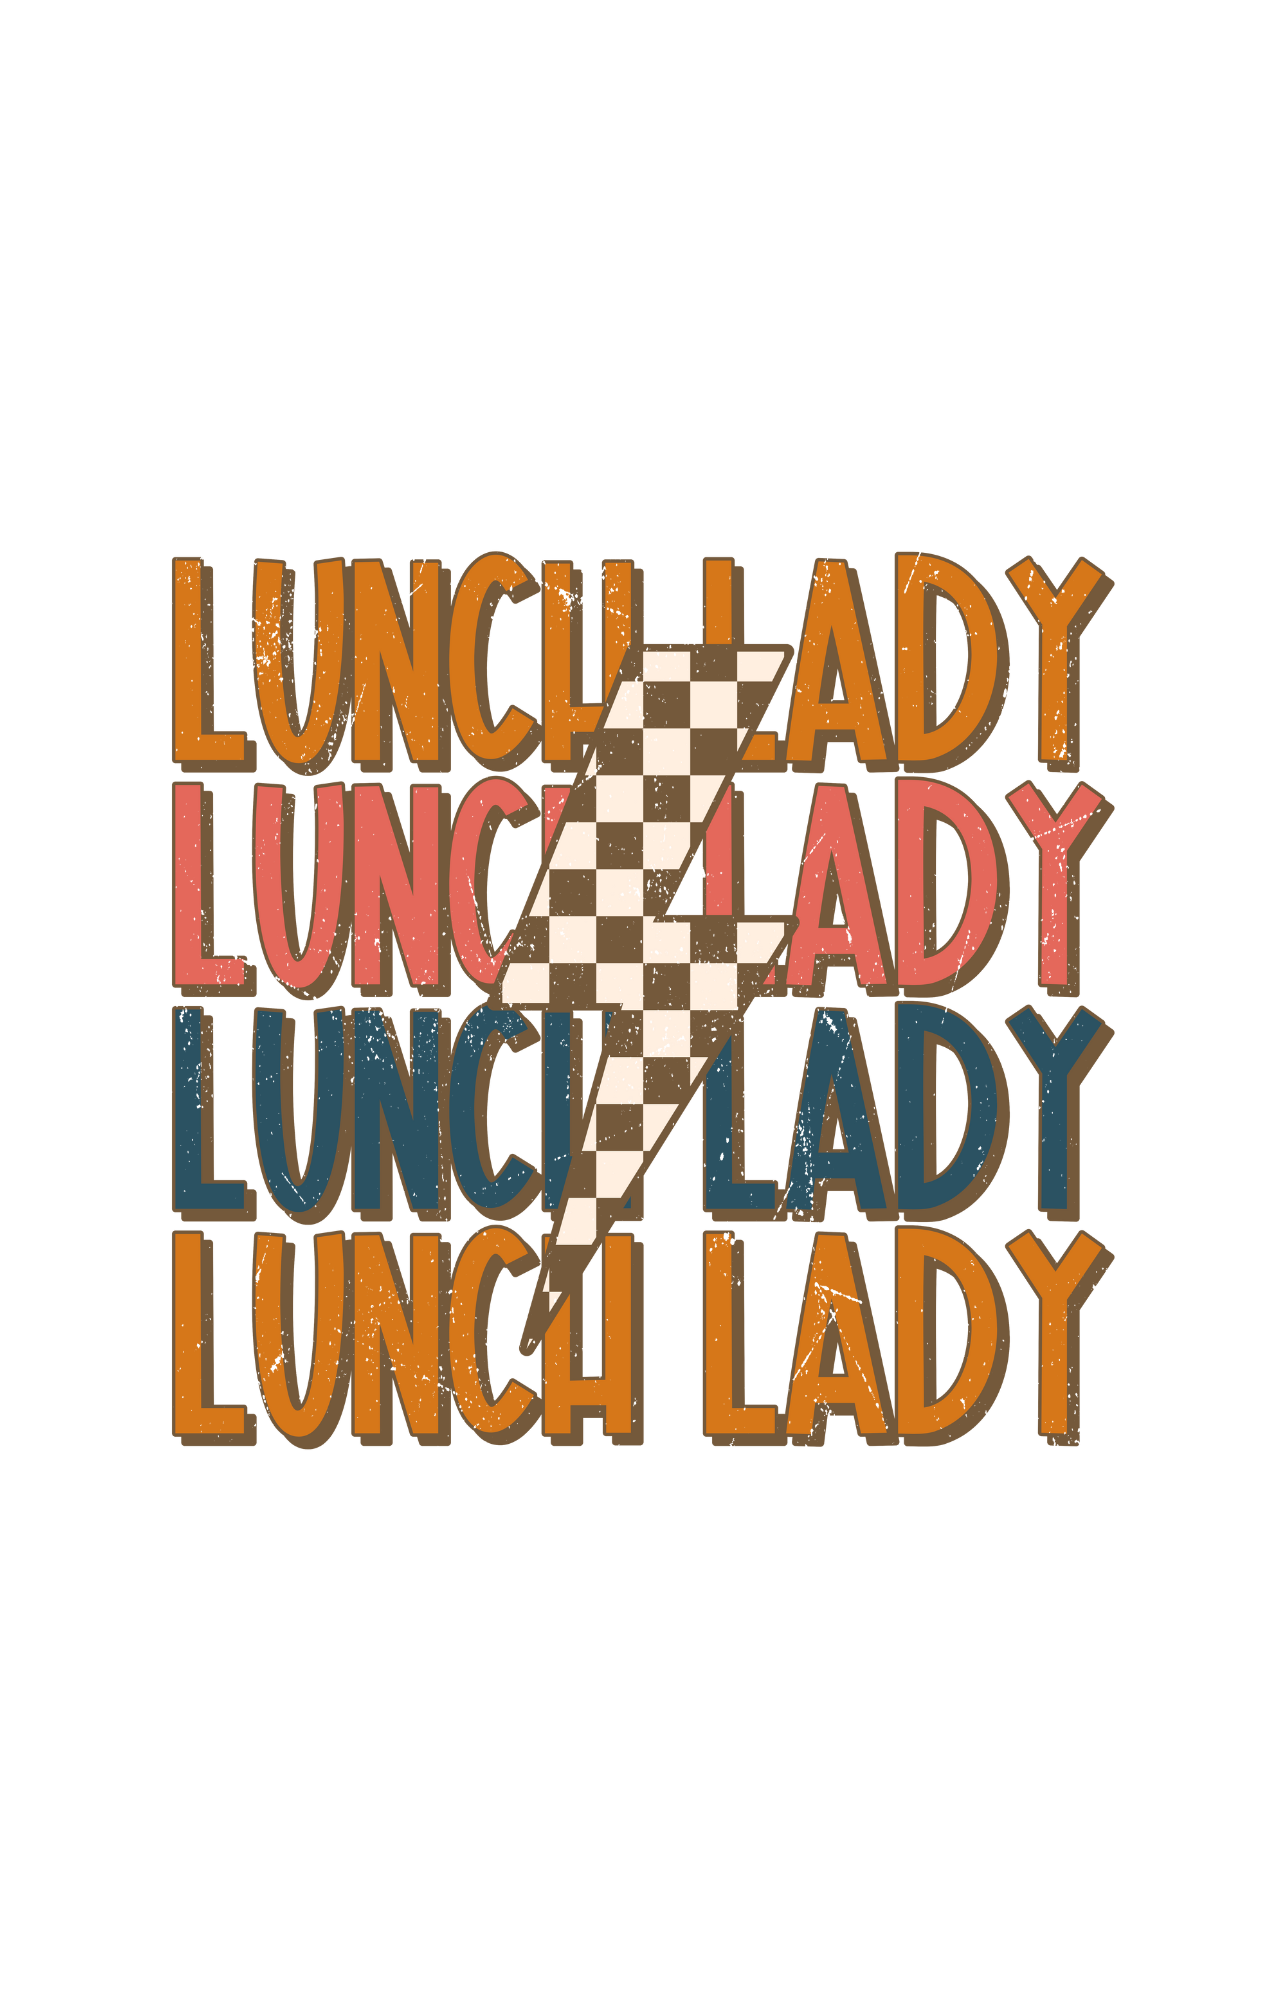 Copy of Lunch lady Smiley Face Scorpio 65 Designs